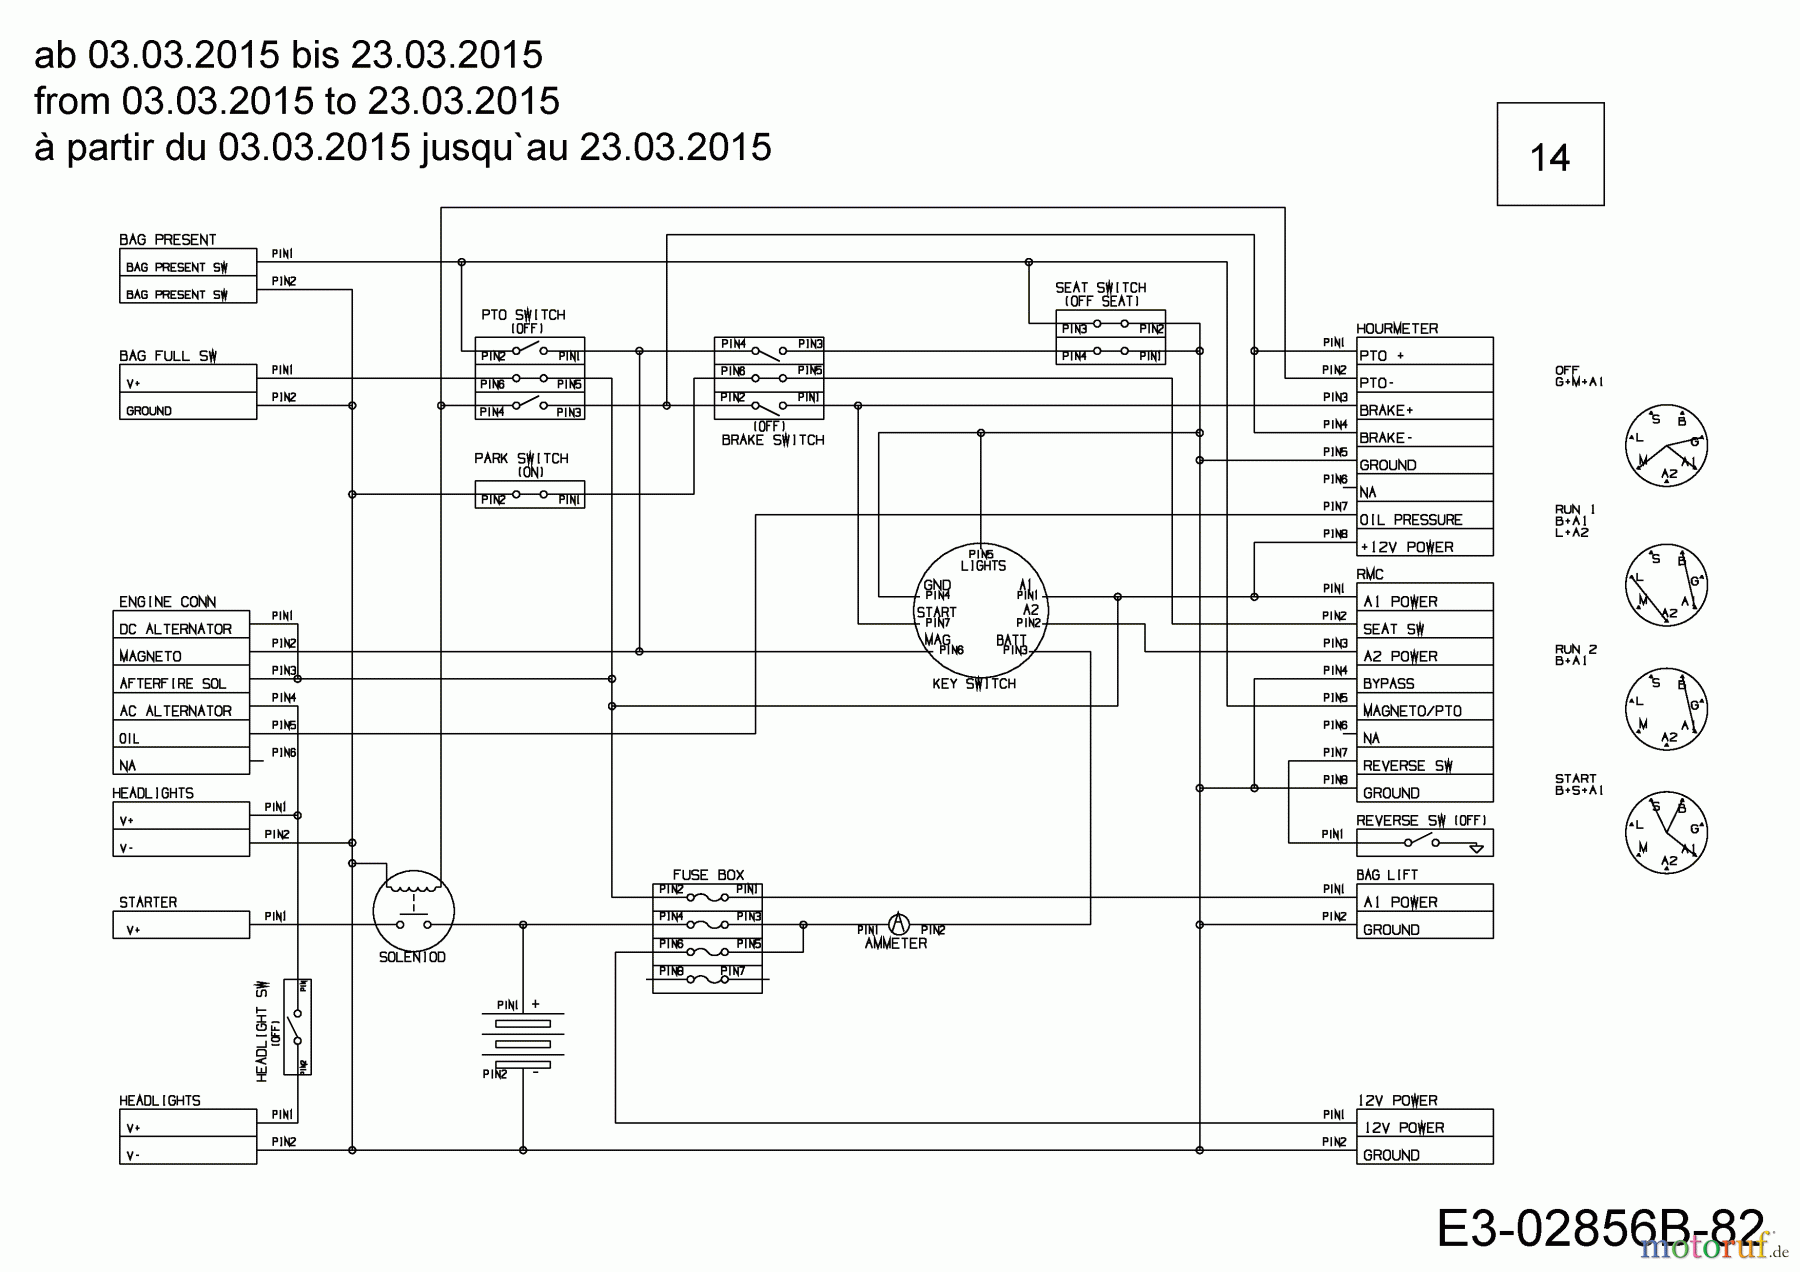  Black Edition Lawn tractors 272-105 TwinH 13HU997N615  (2015) Wiring diagram from 03.03.2015 to 23.03.2015